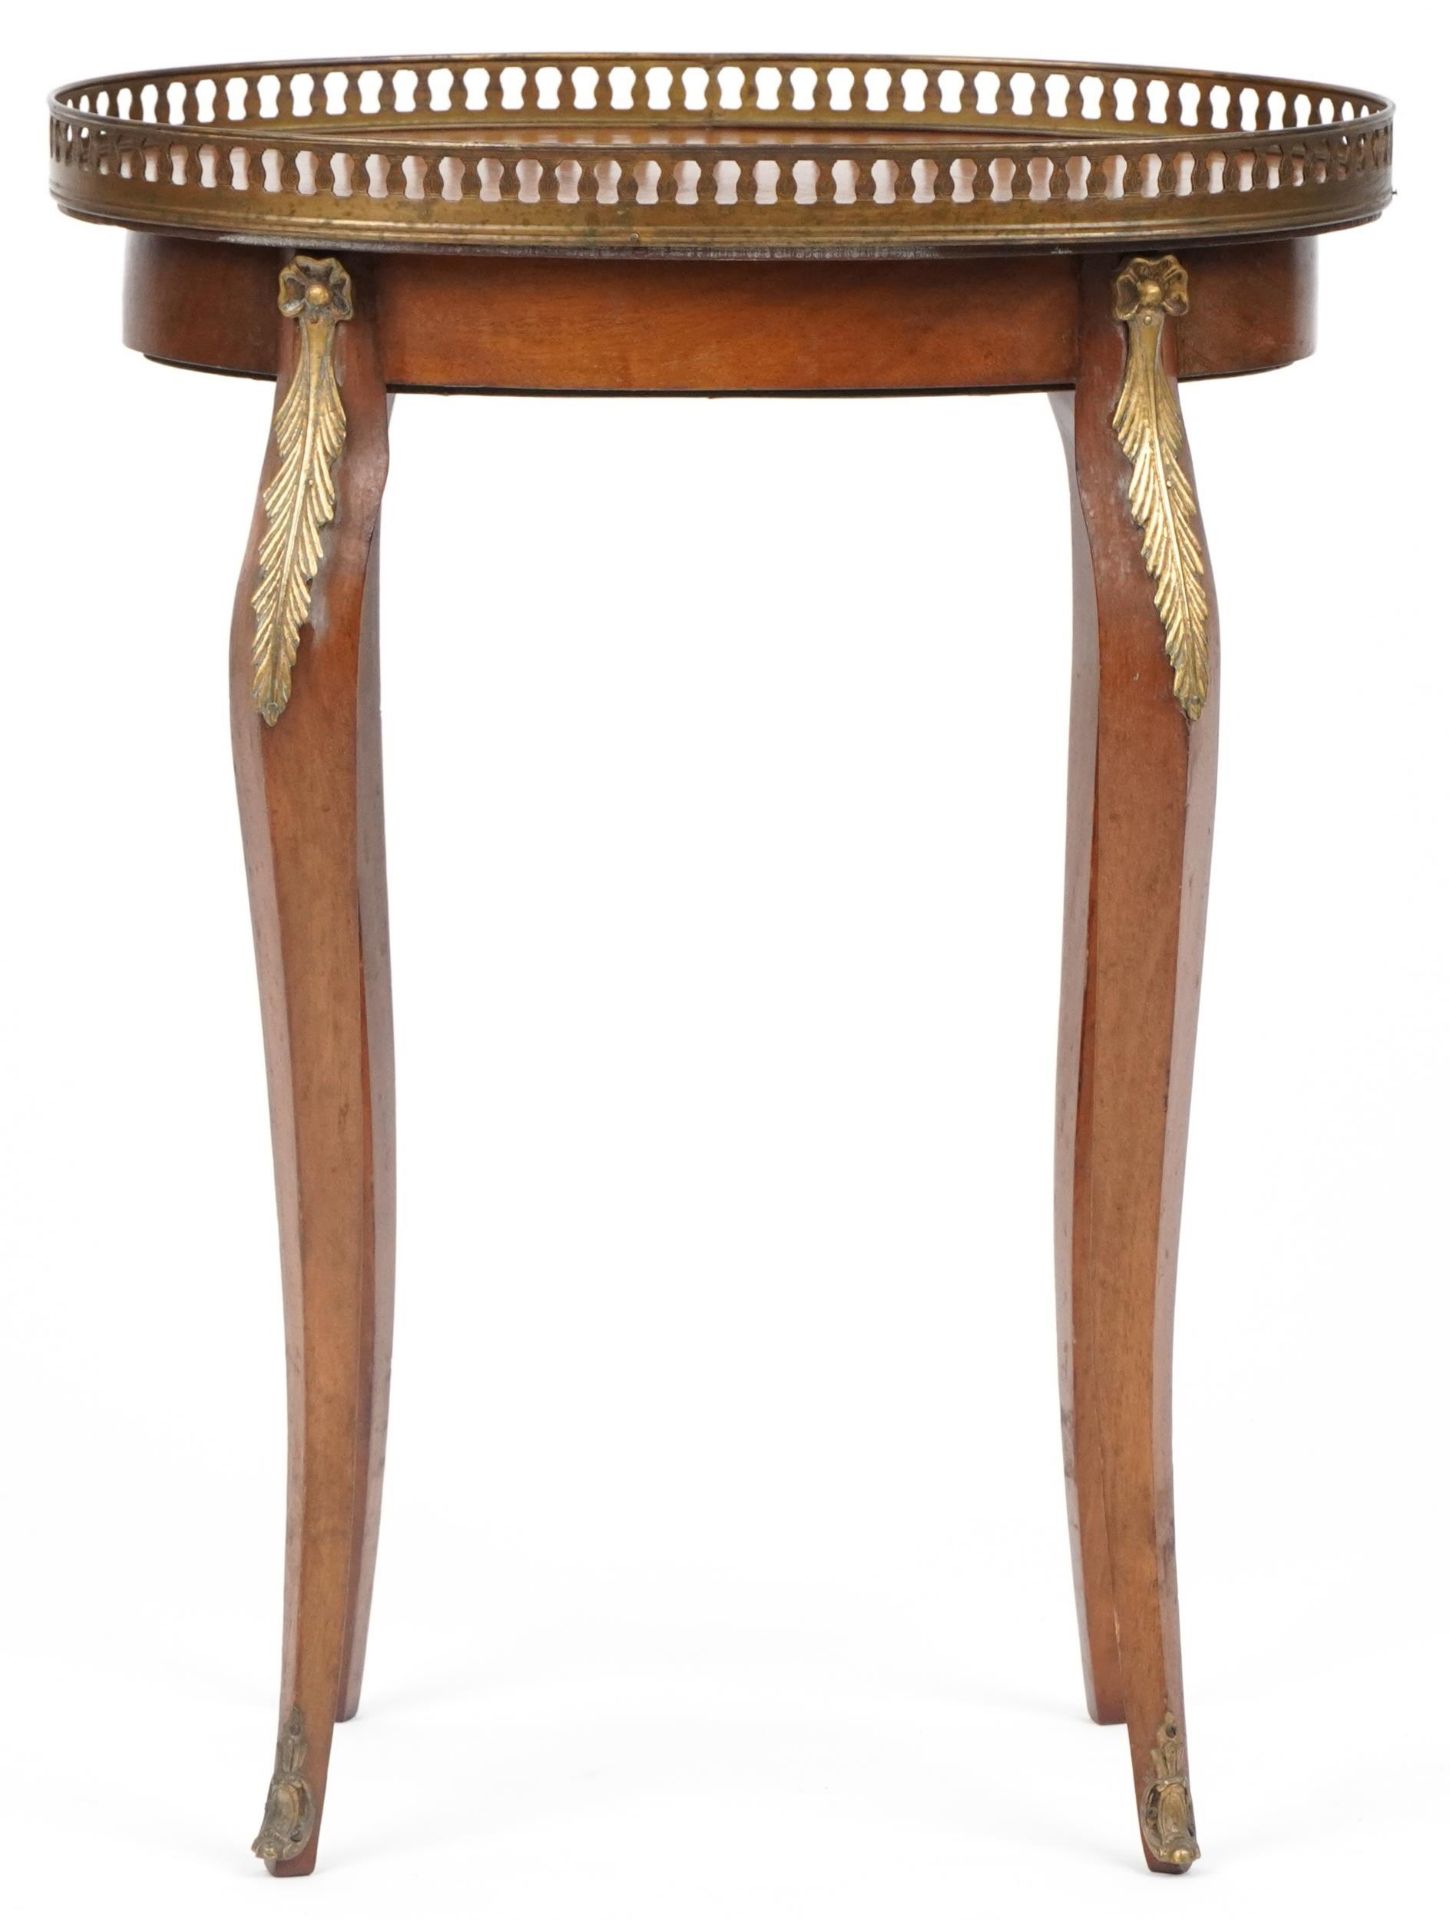 French inlaid kingwood side table with oval top having an engraved brass gallery, 59.5cm x 46cm W - Image 2 of 5